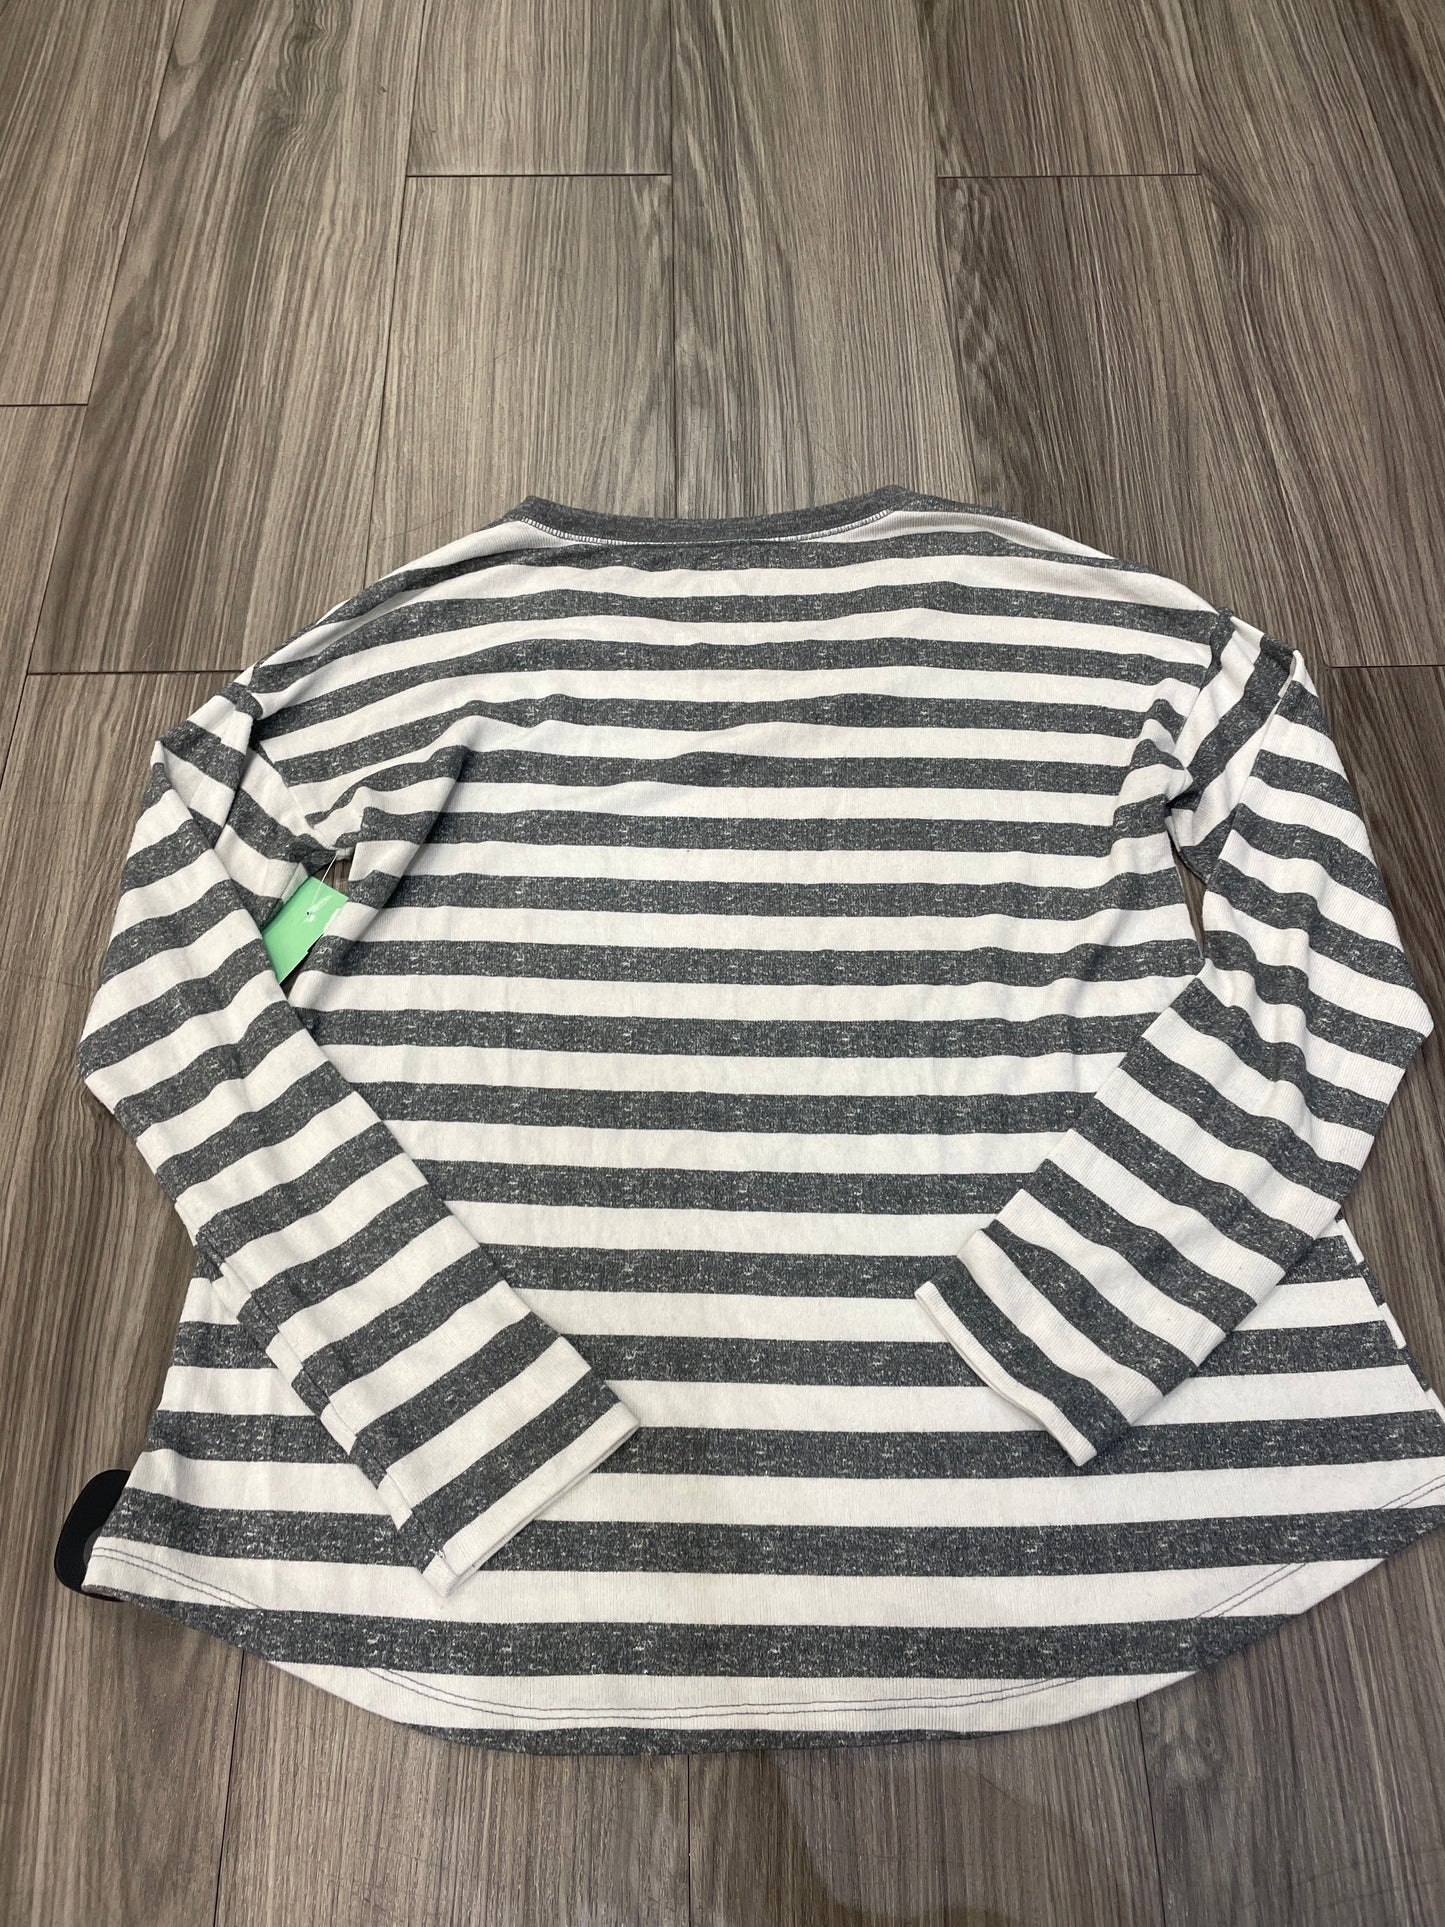 Striped Pattern Top Long Sleeve Maurices, Size S